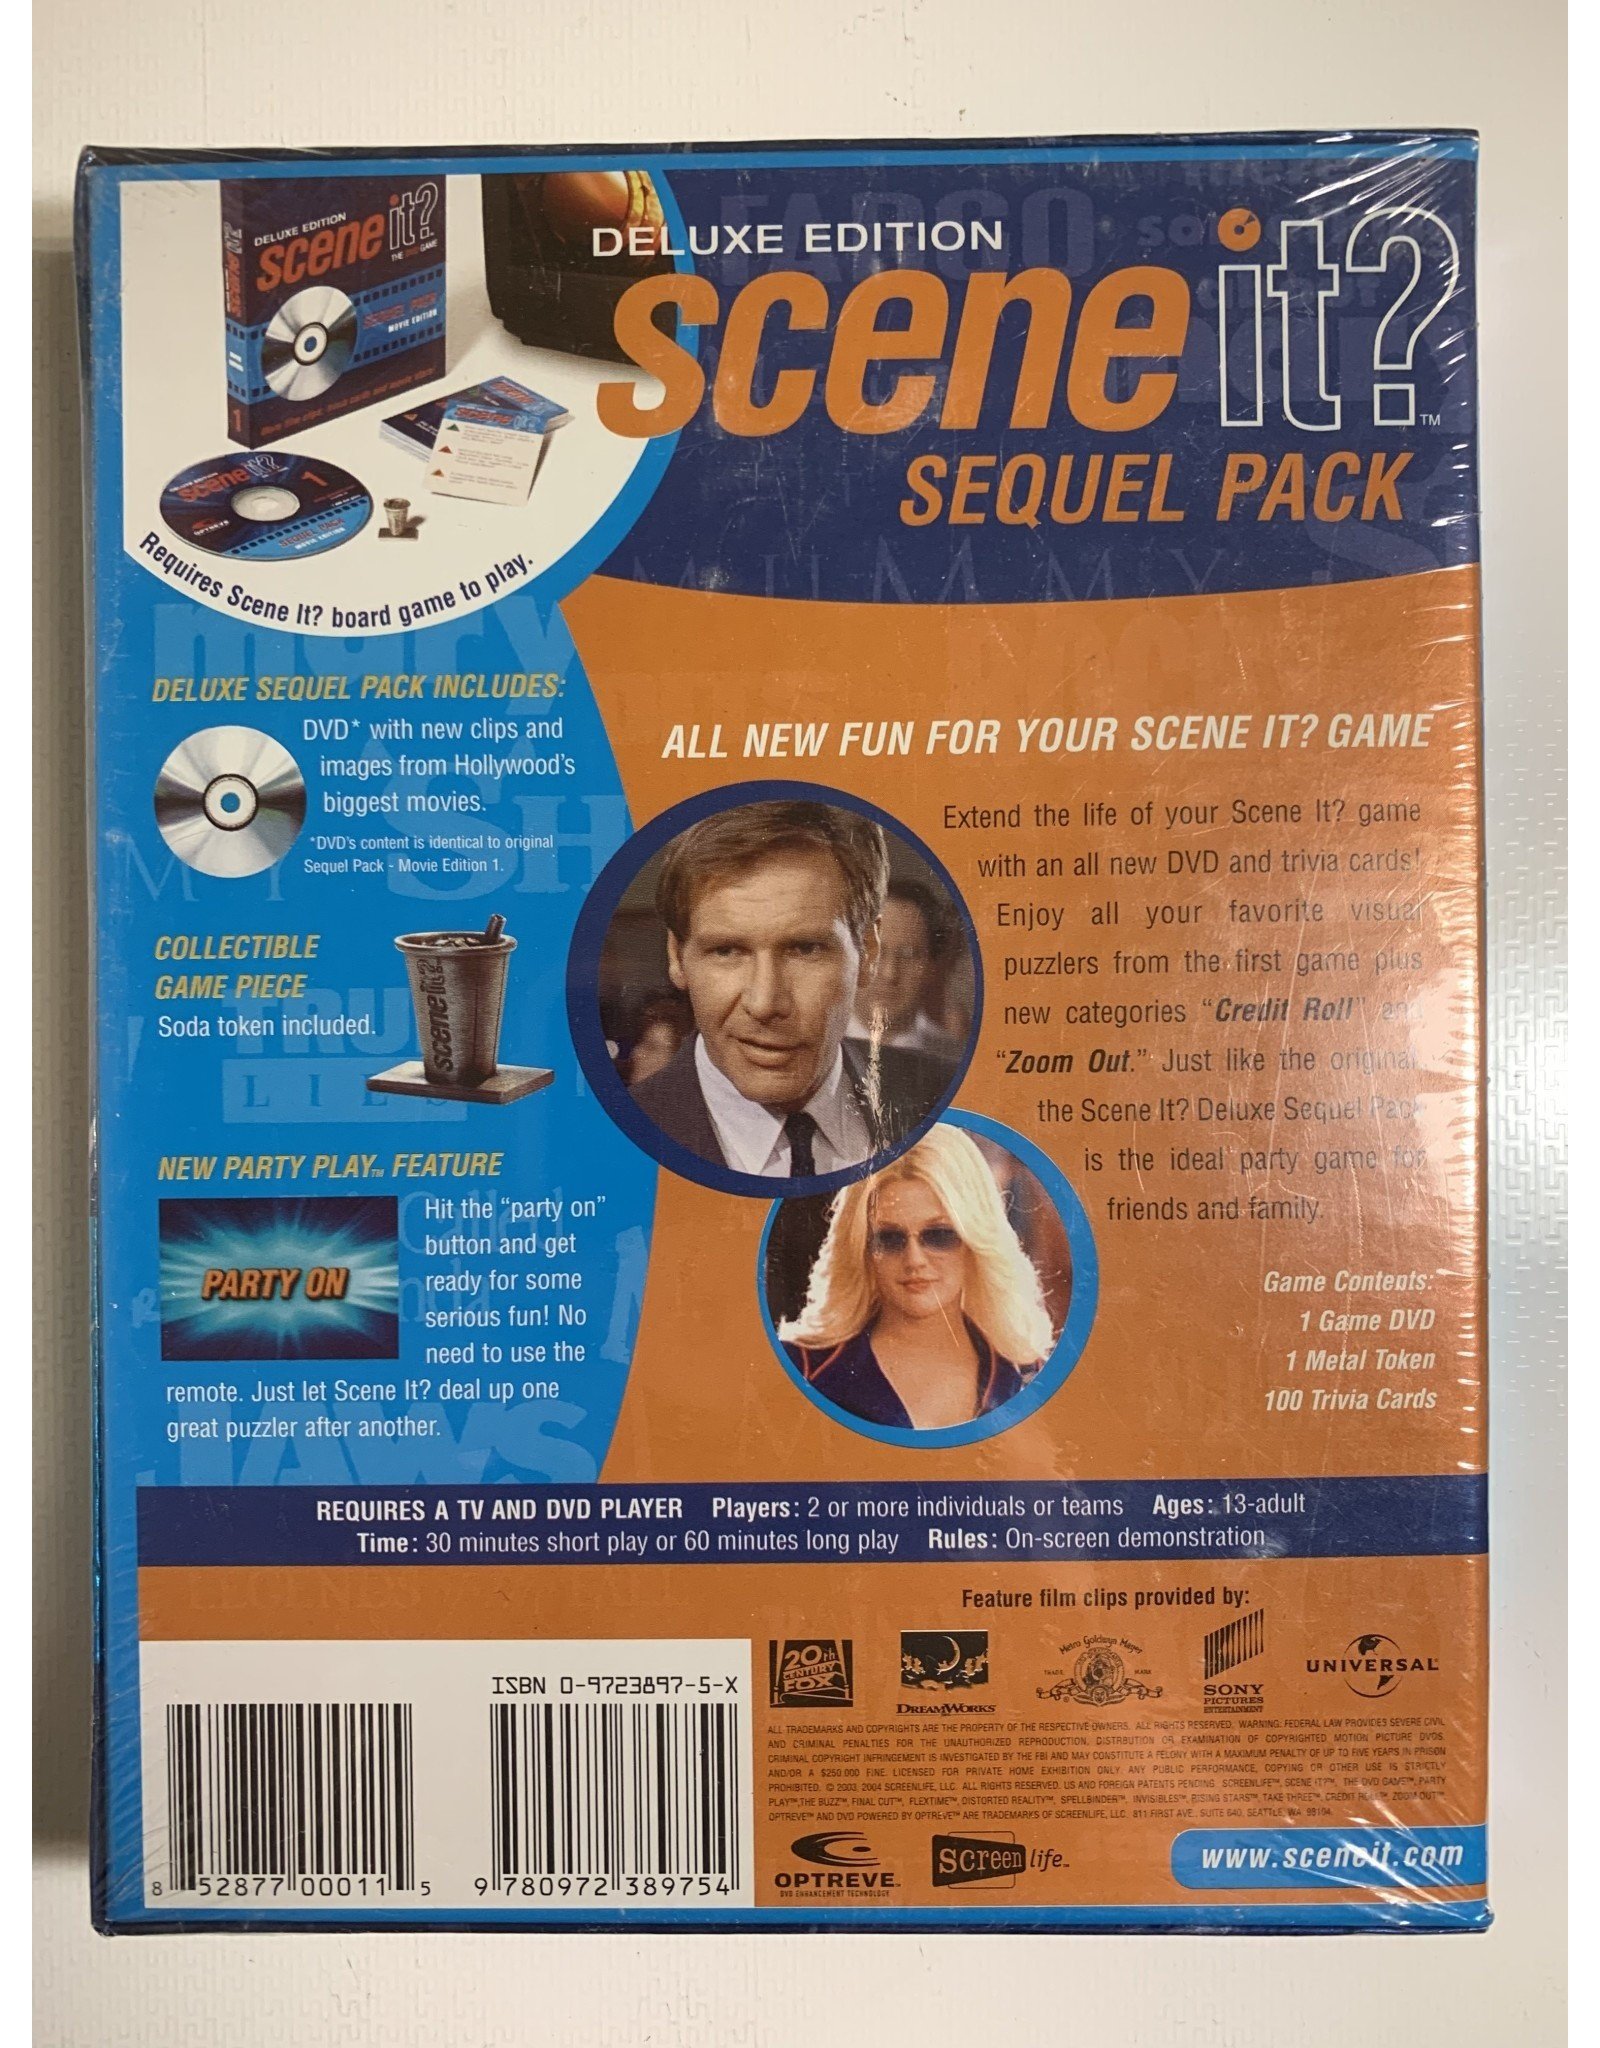 Screenlife Scene It? Sequel Pack: Movie Edition (2004) NIS